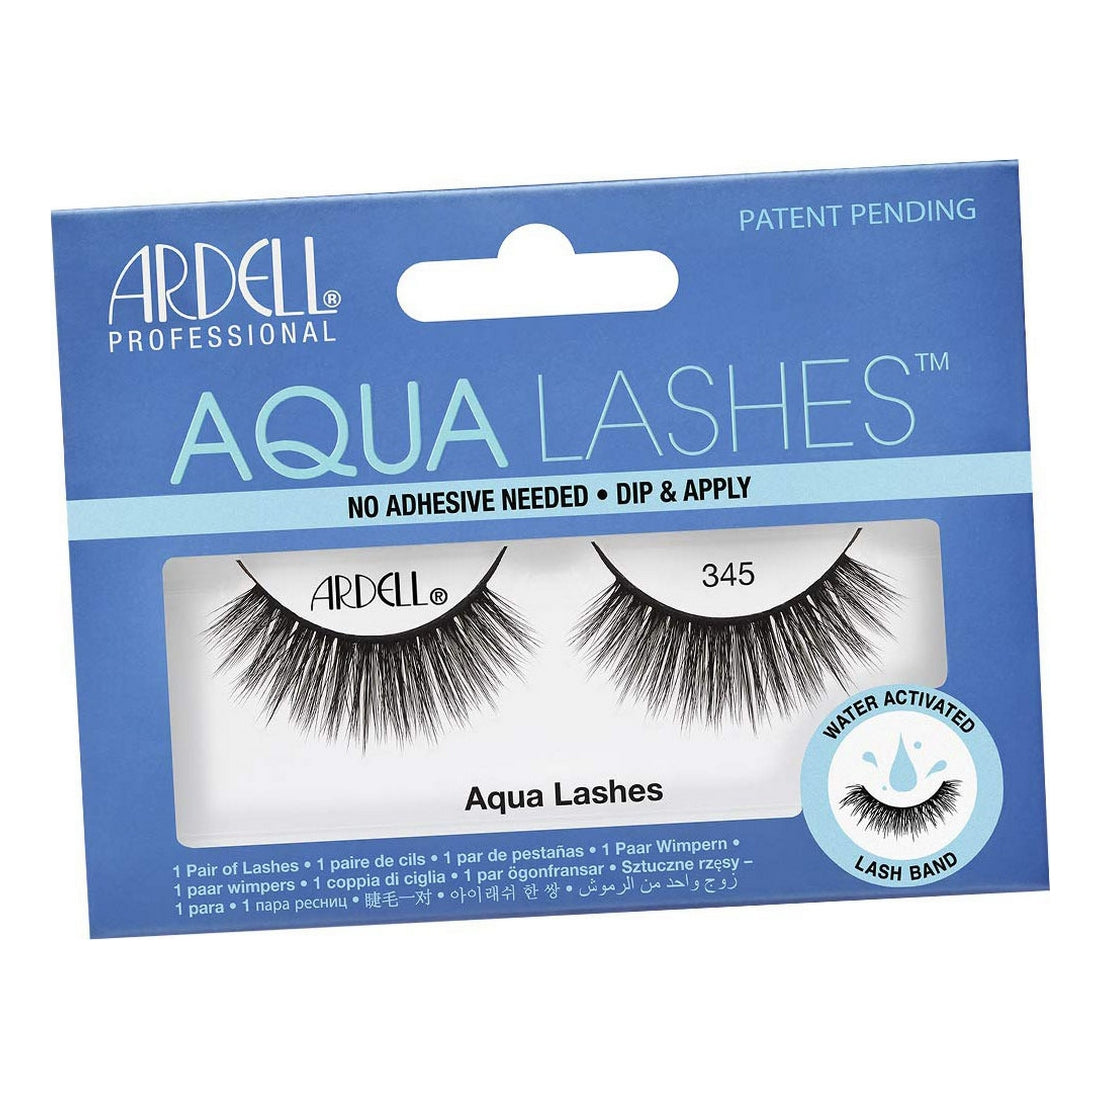 Valse Wimpers Aqua Lashes Ardell 345